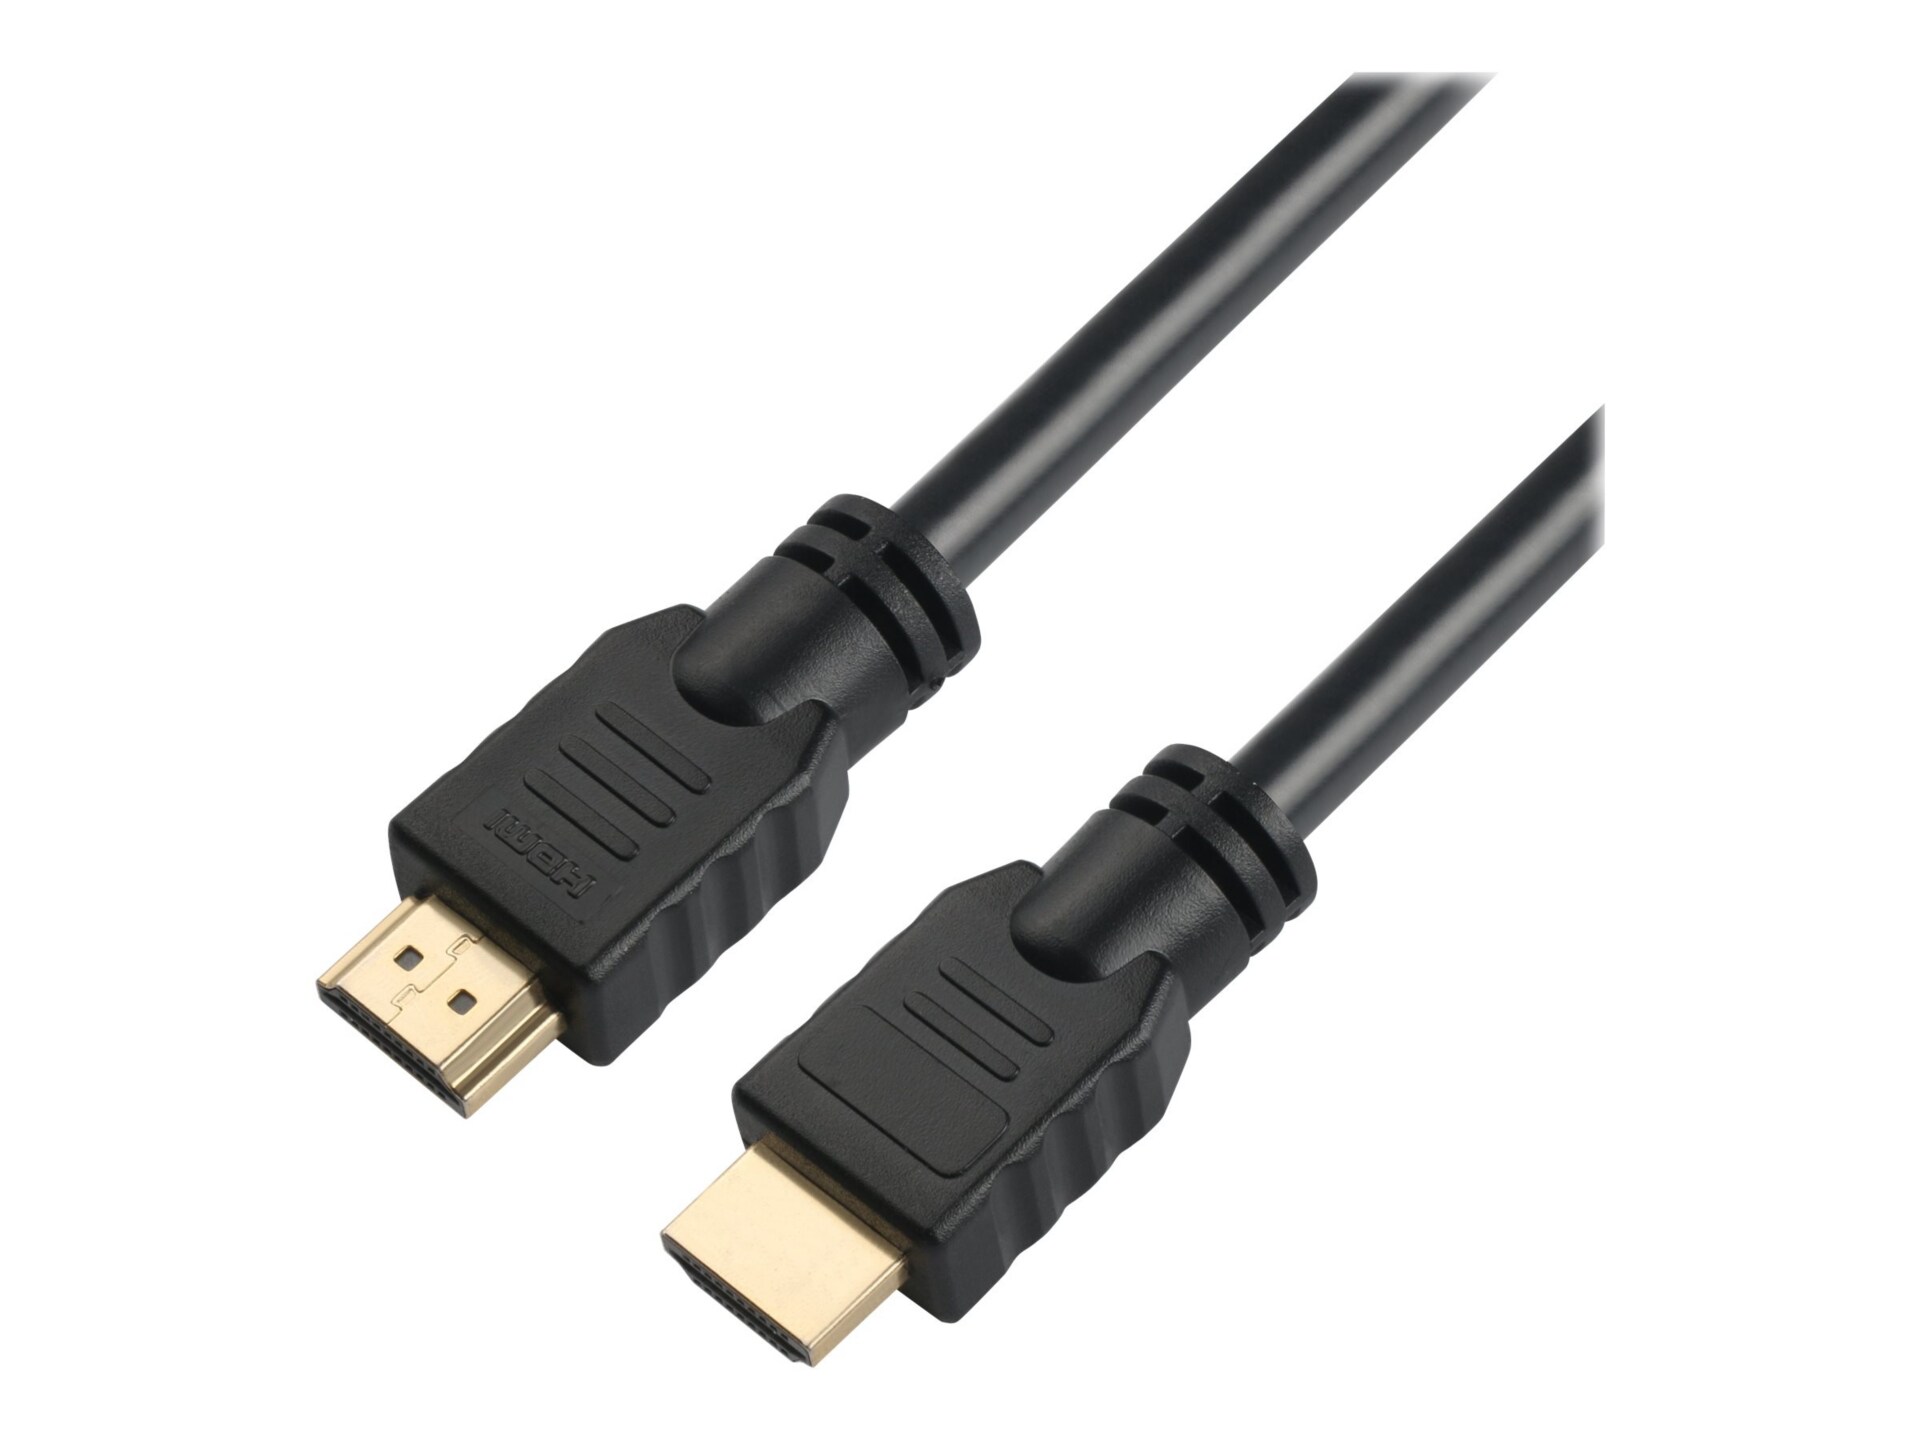 4XEM HDMI cable with Ethernet - 164 ft